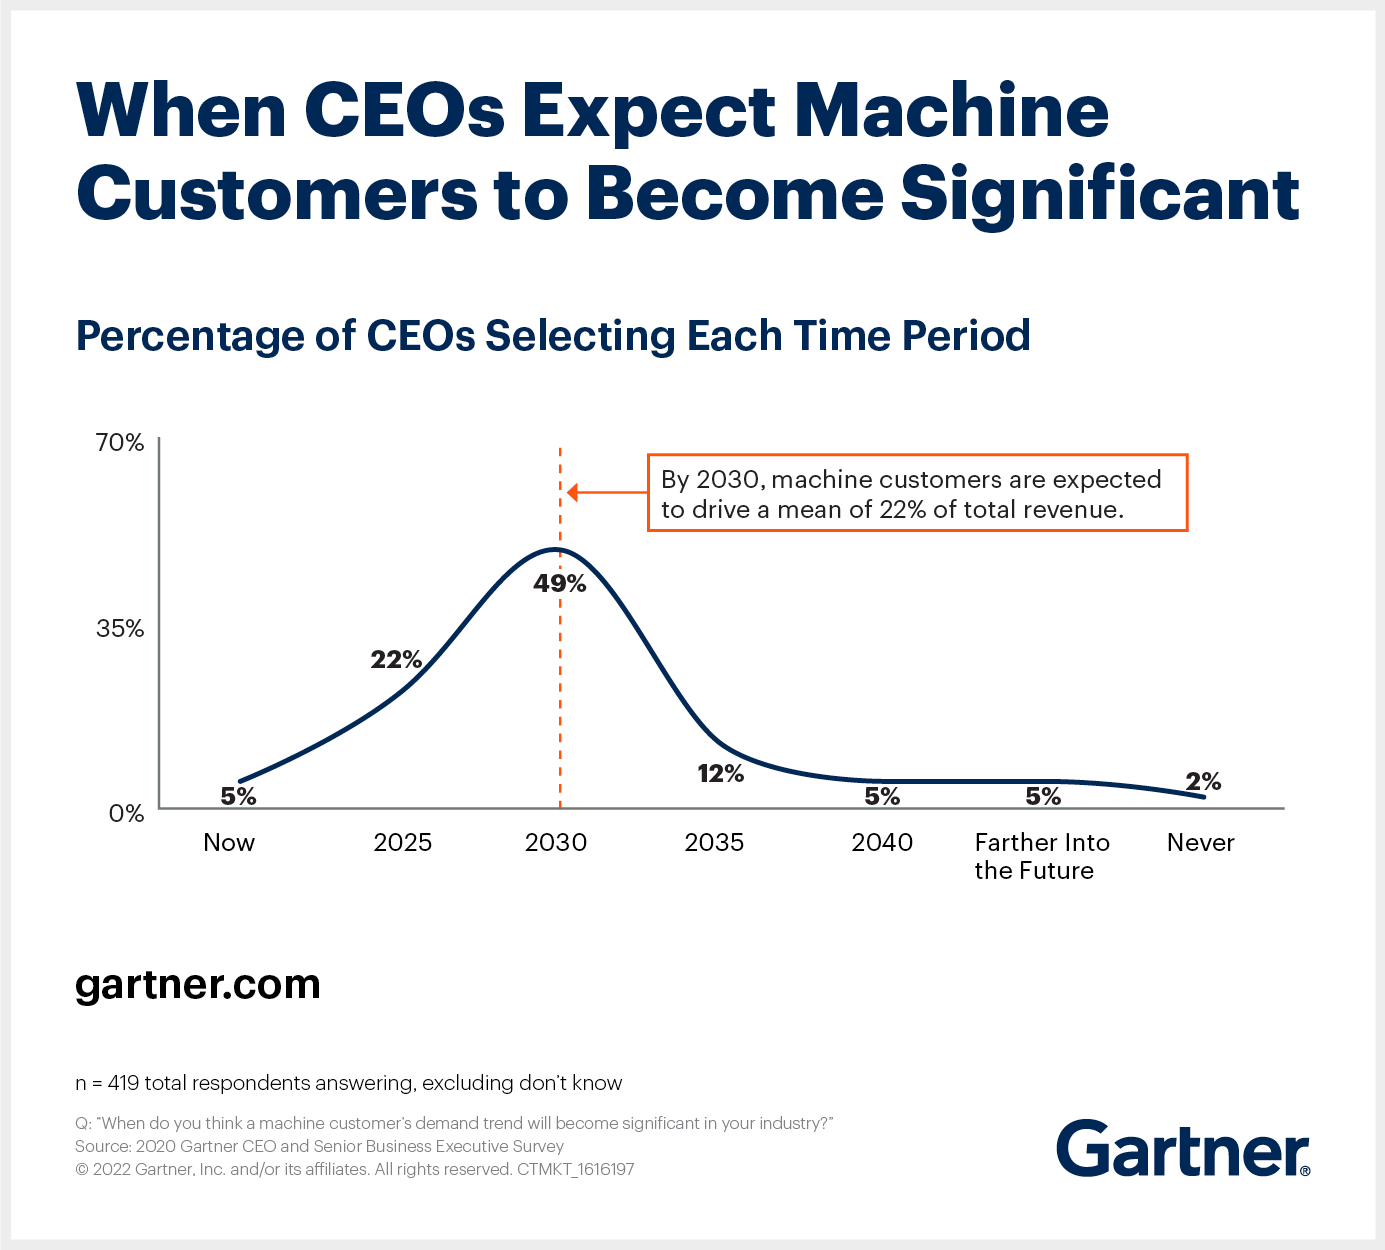 When CEOs Expect Machine Customers to Become Significant